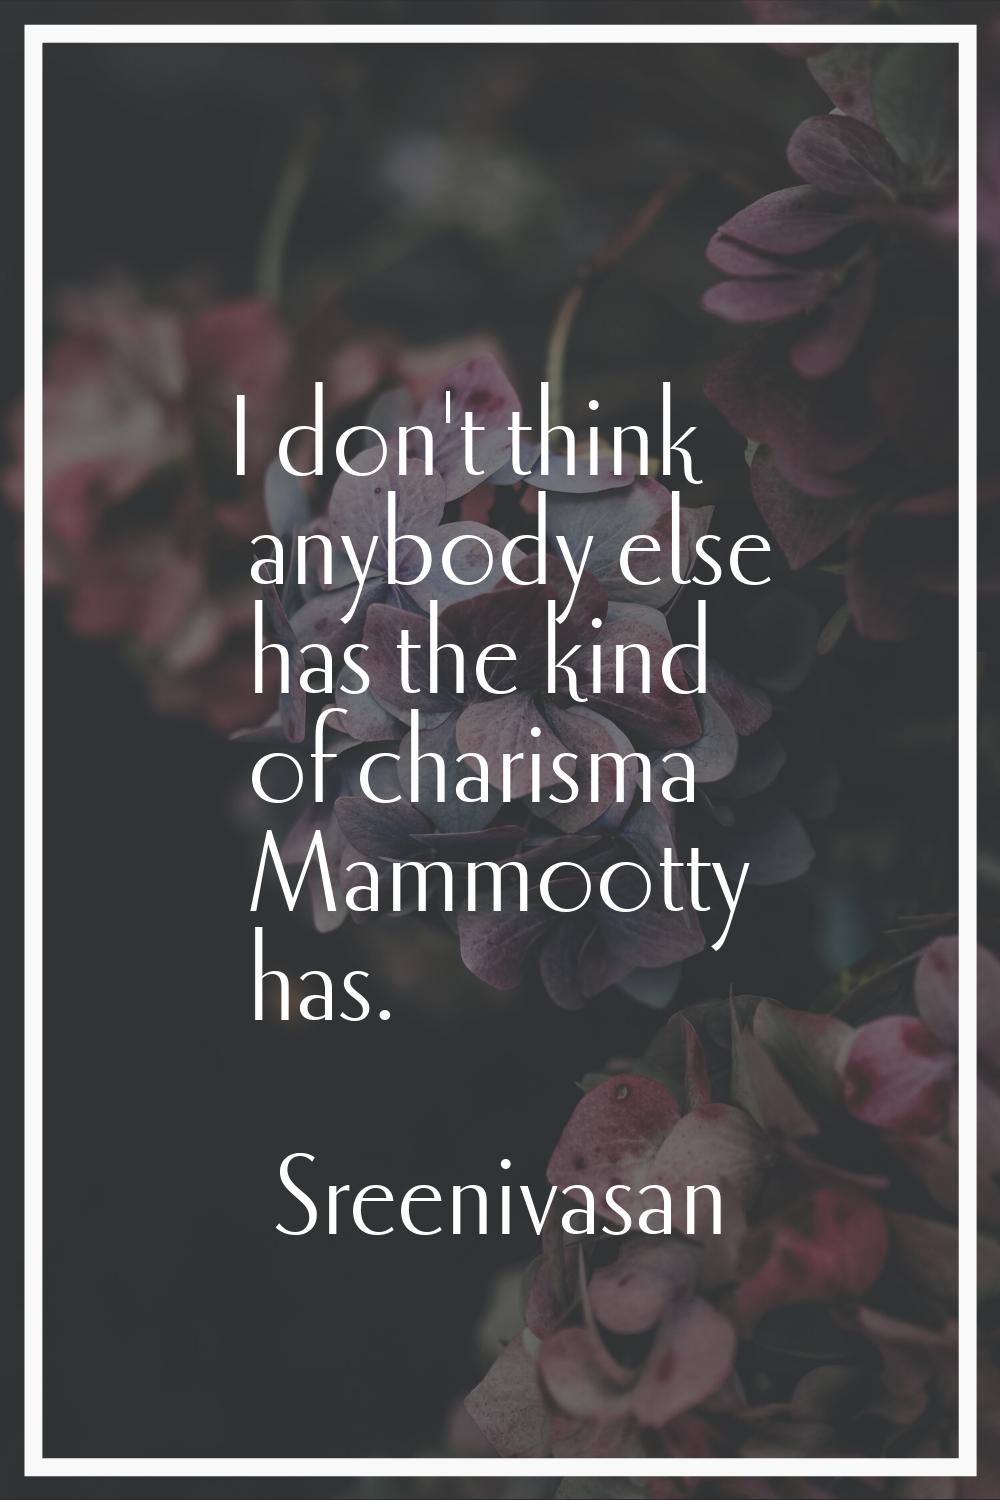 I don't think anybody else has the kind of charisma Mammootty has.